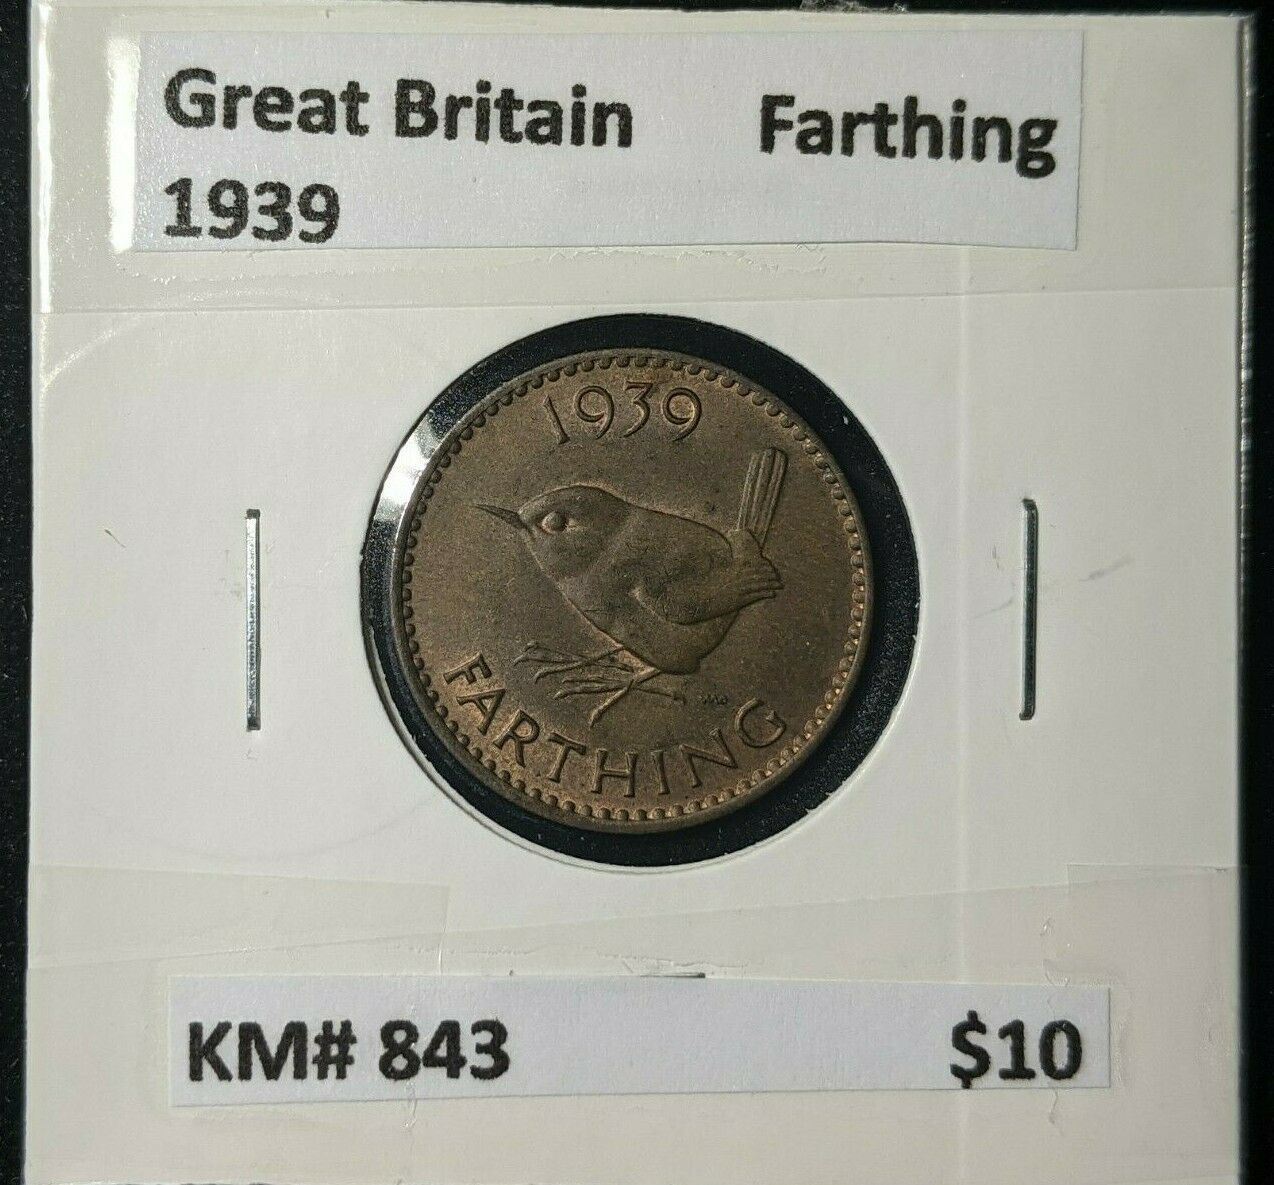 Great Britain 1939 1/4d Farthing KM# 843 #124